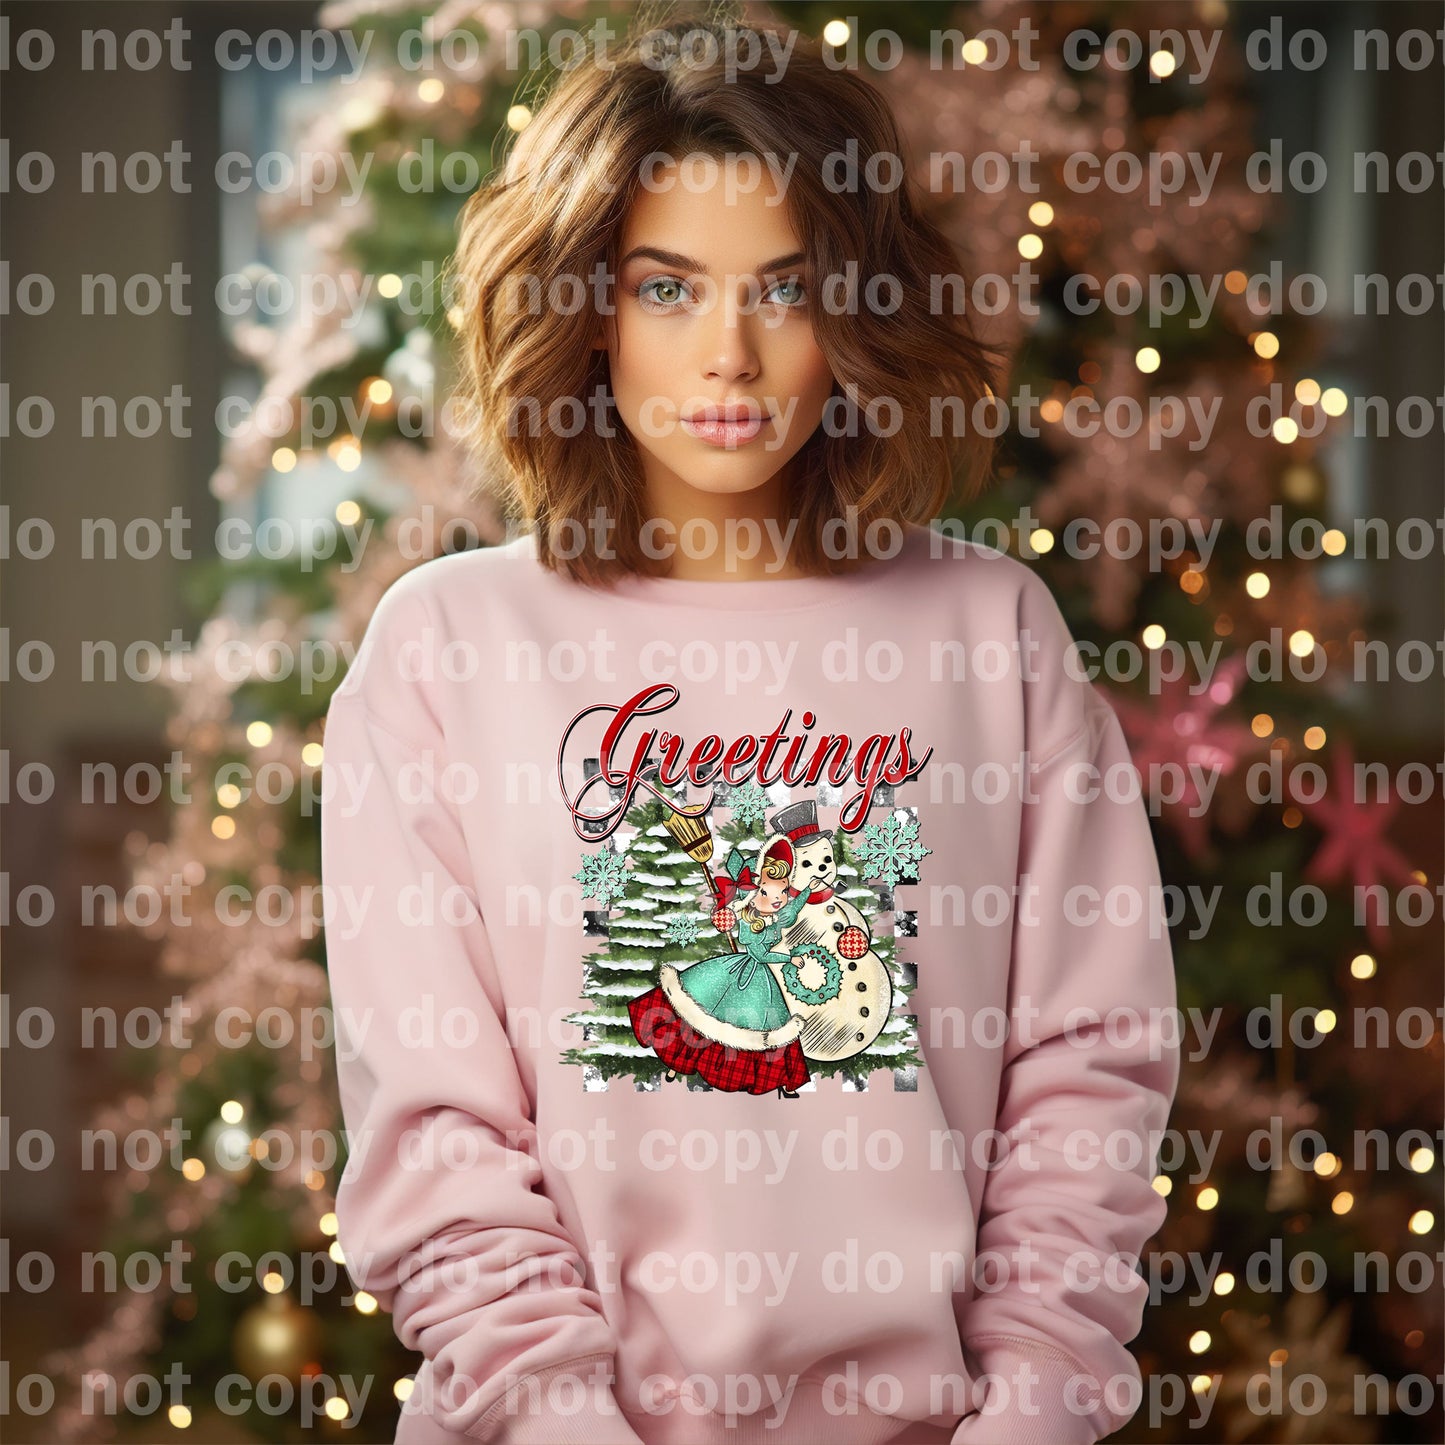 Greetings Vintage Frosty Snowman with Optional Sleeve Design Dream Print or Sublimation Print